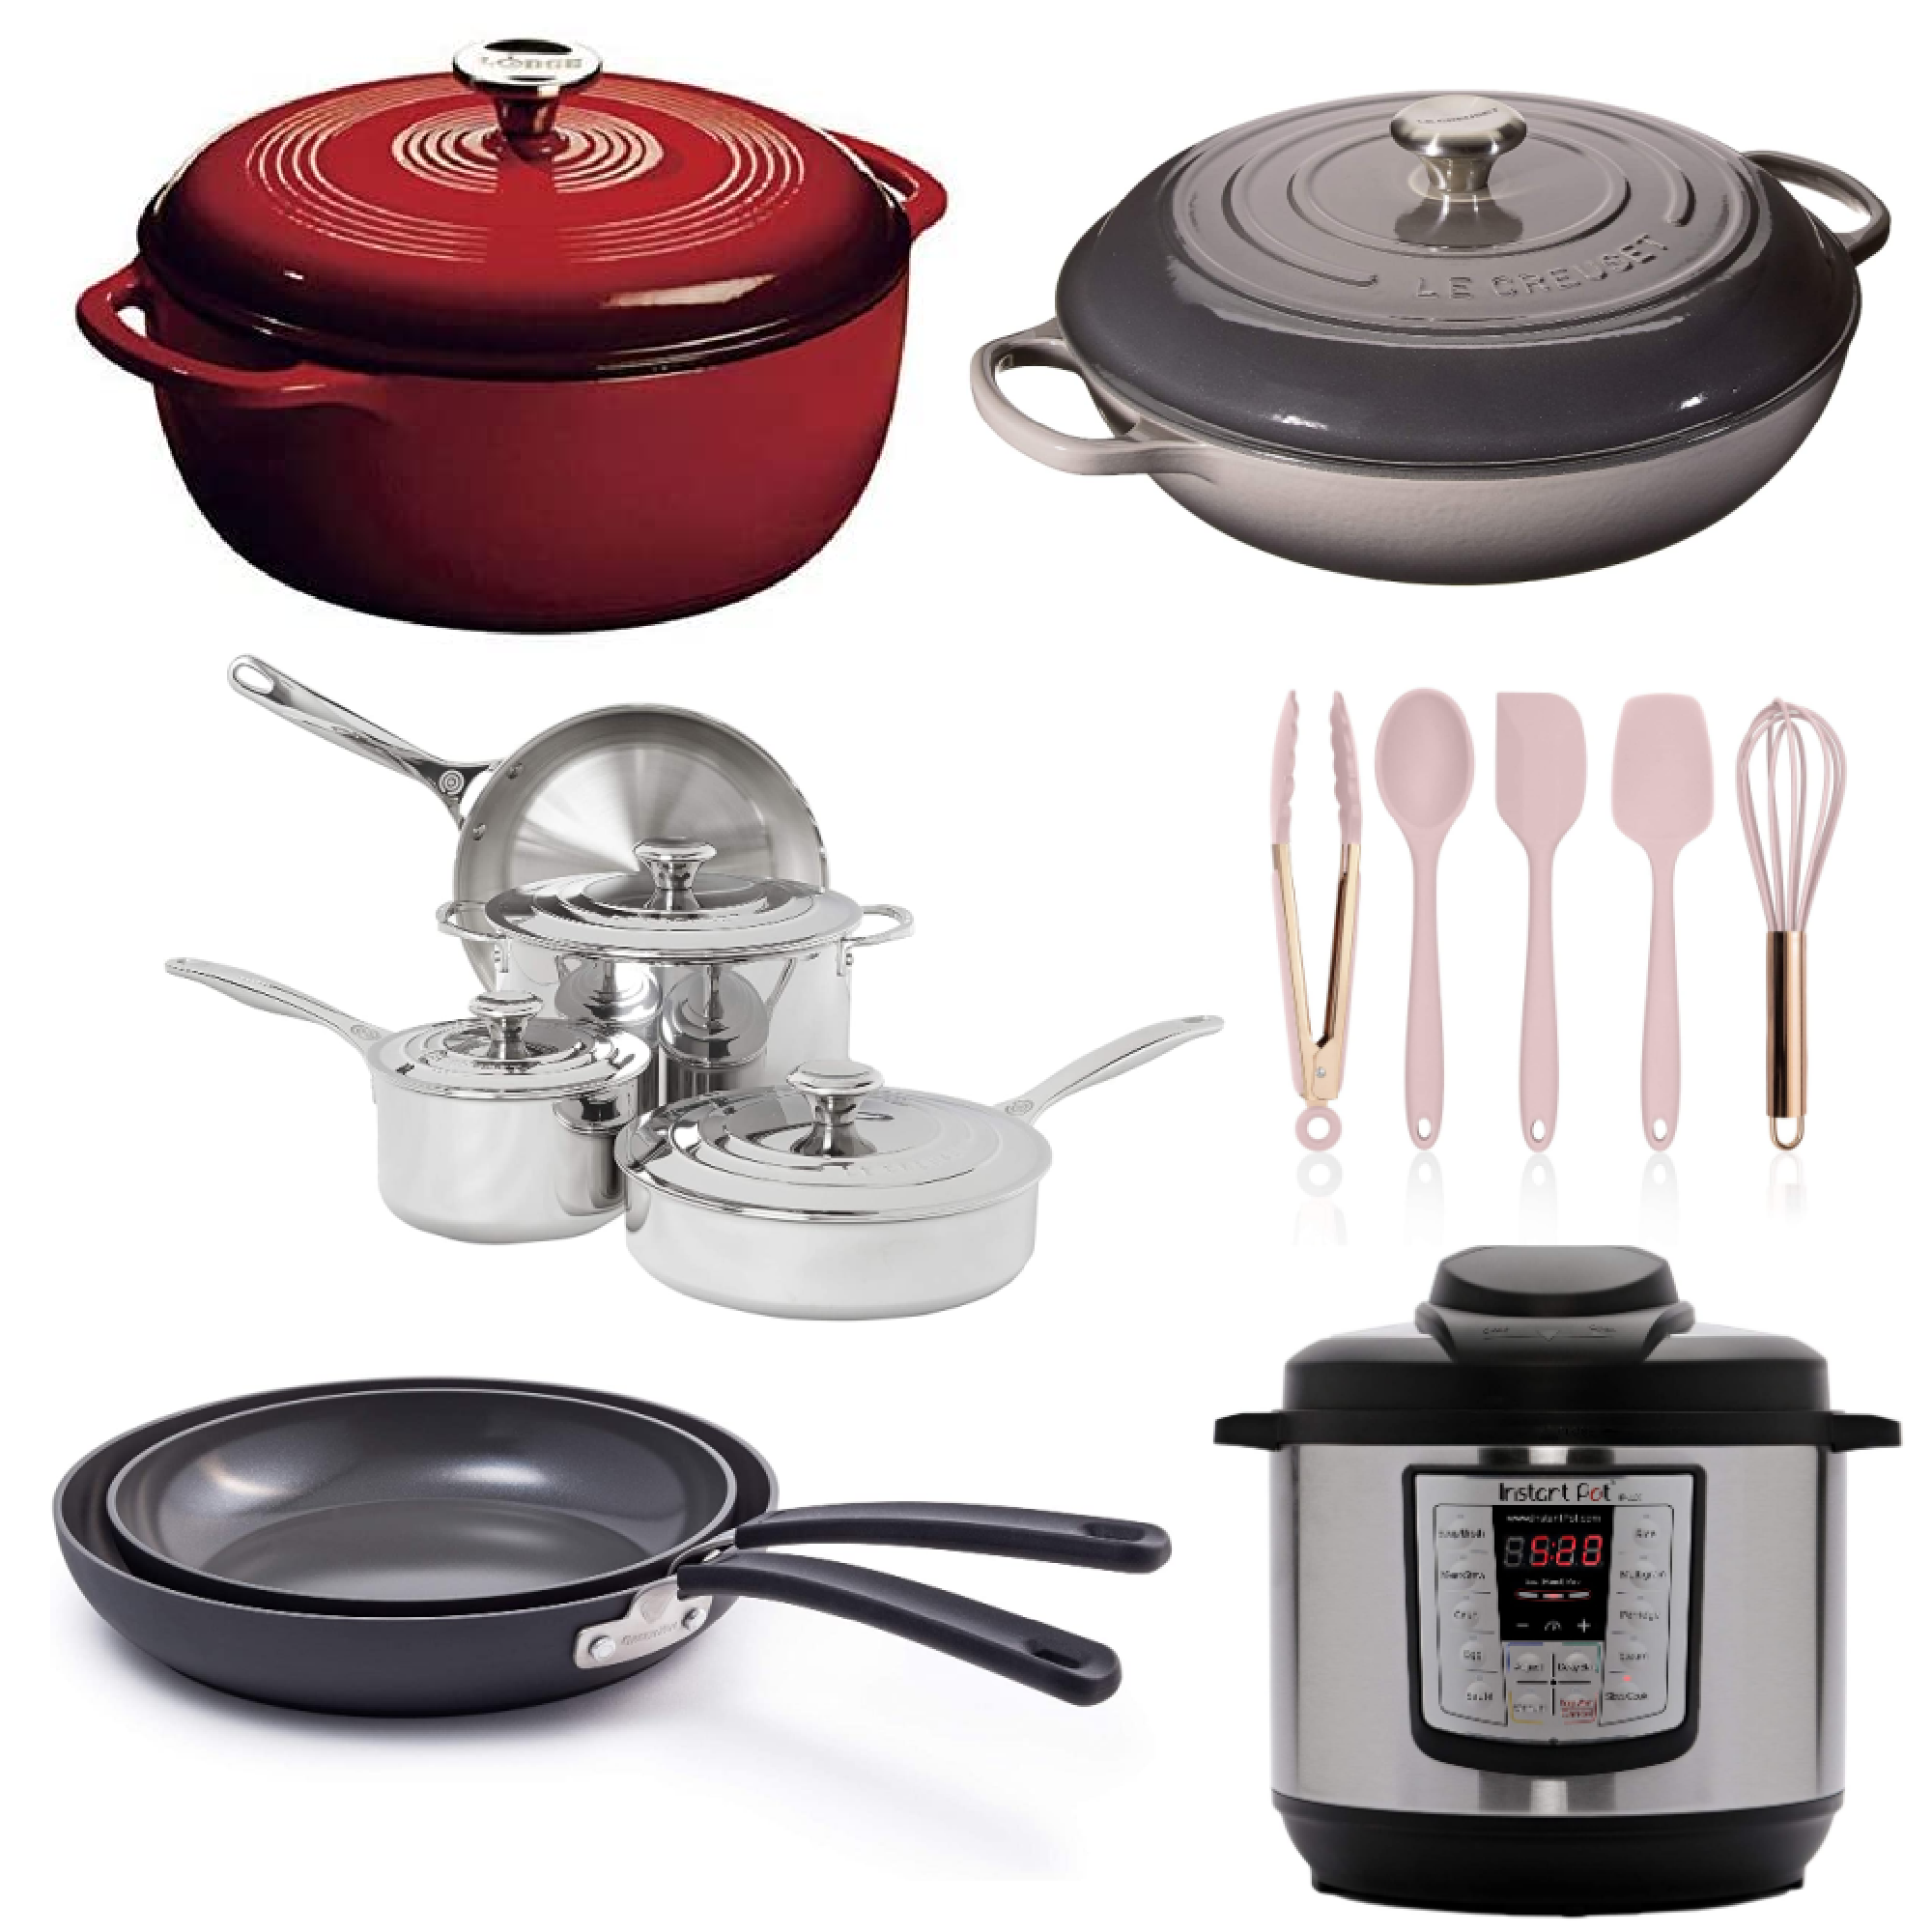 CLICK HERE FOR MY FAVORITE KITCHEN TOOLS